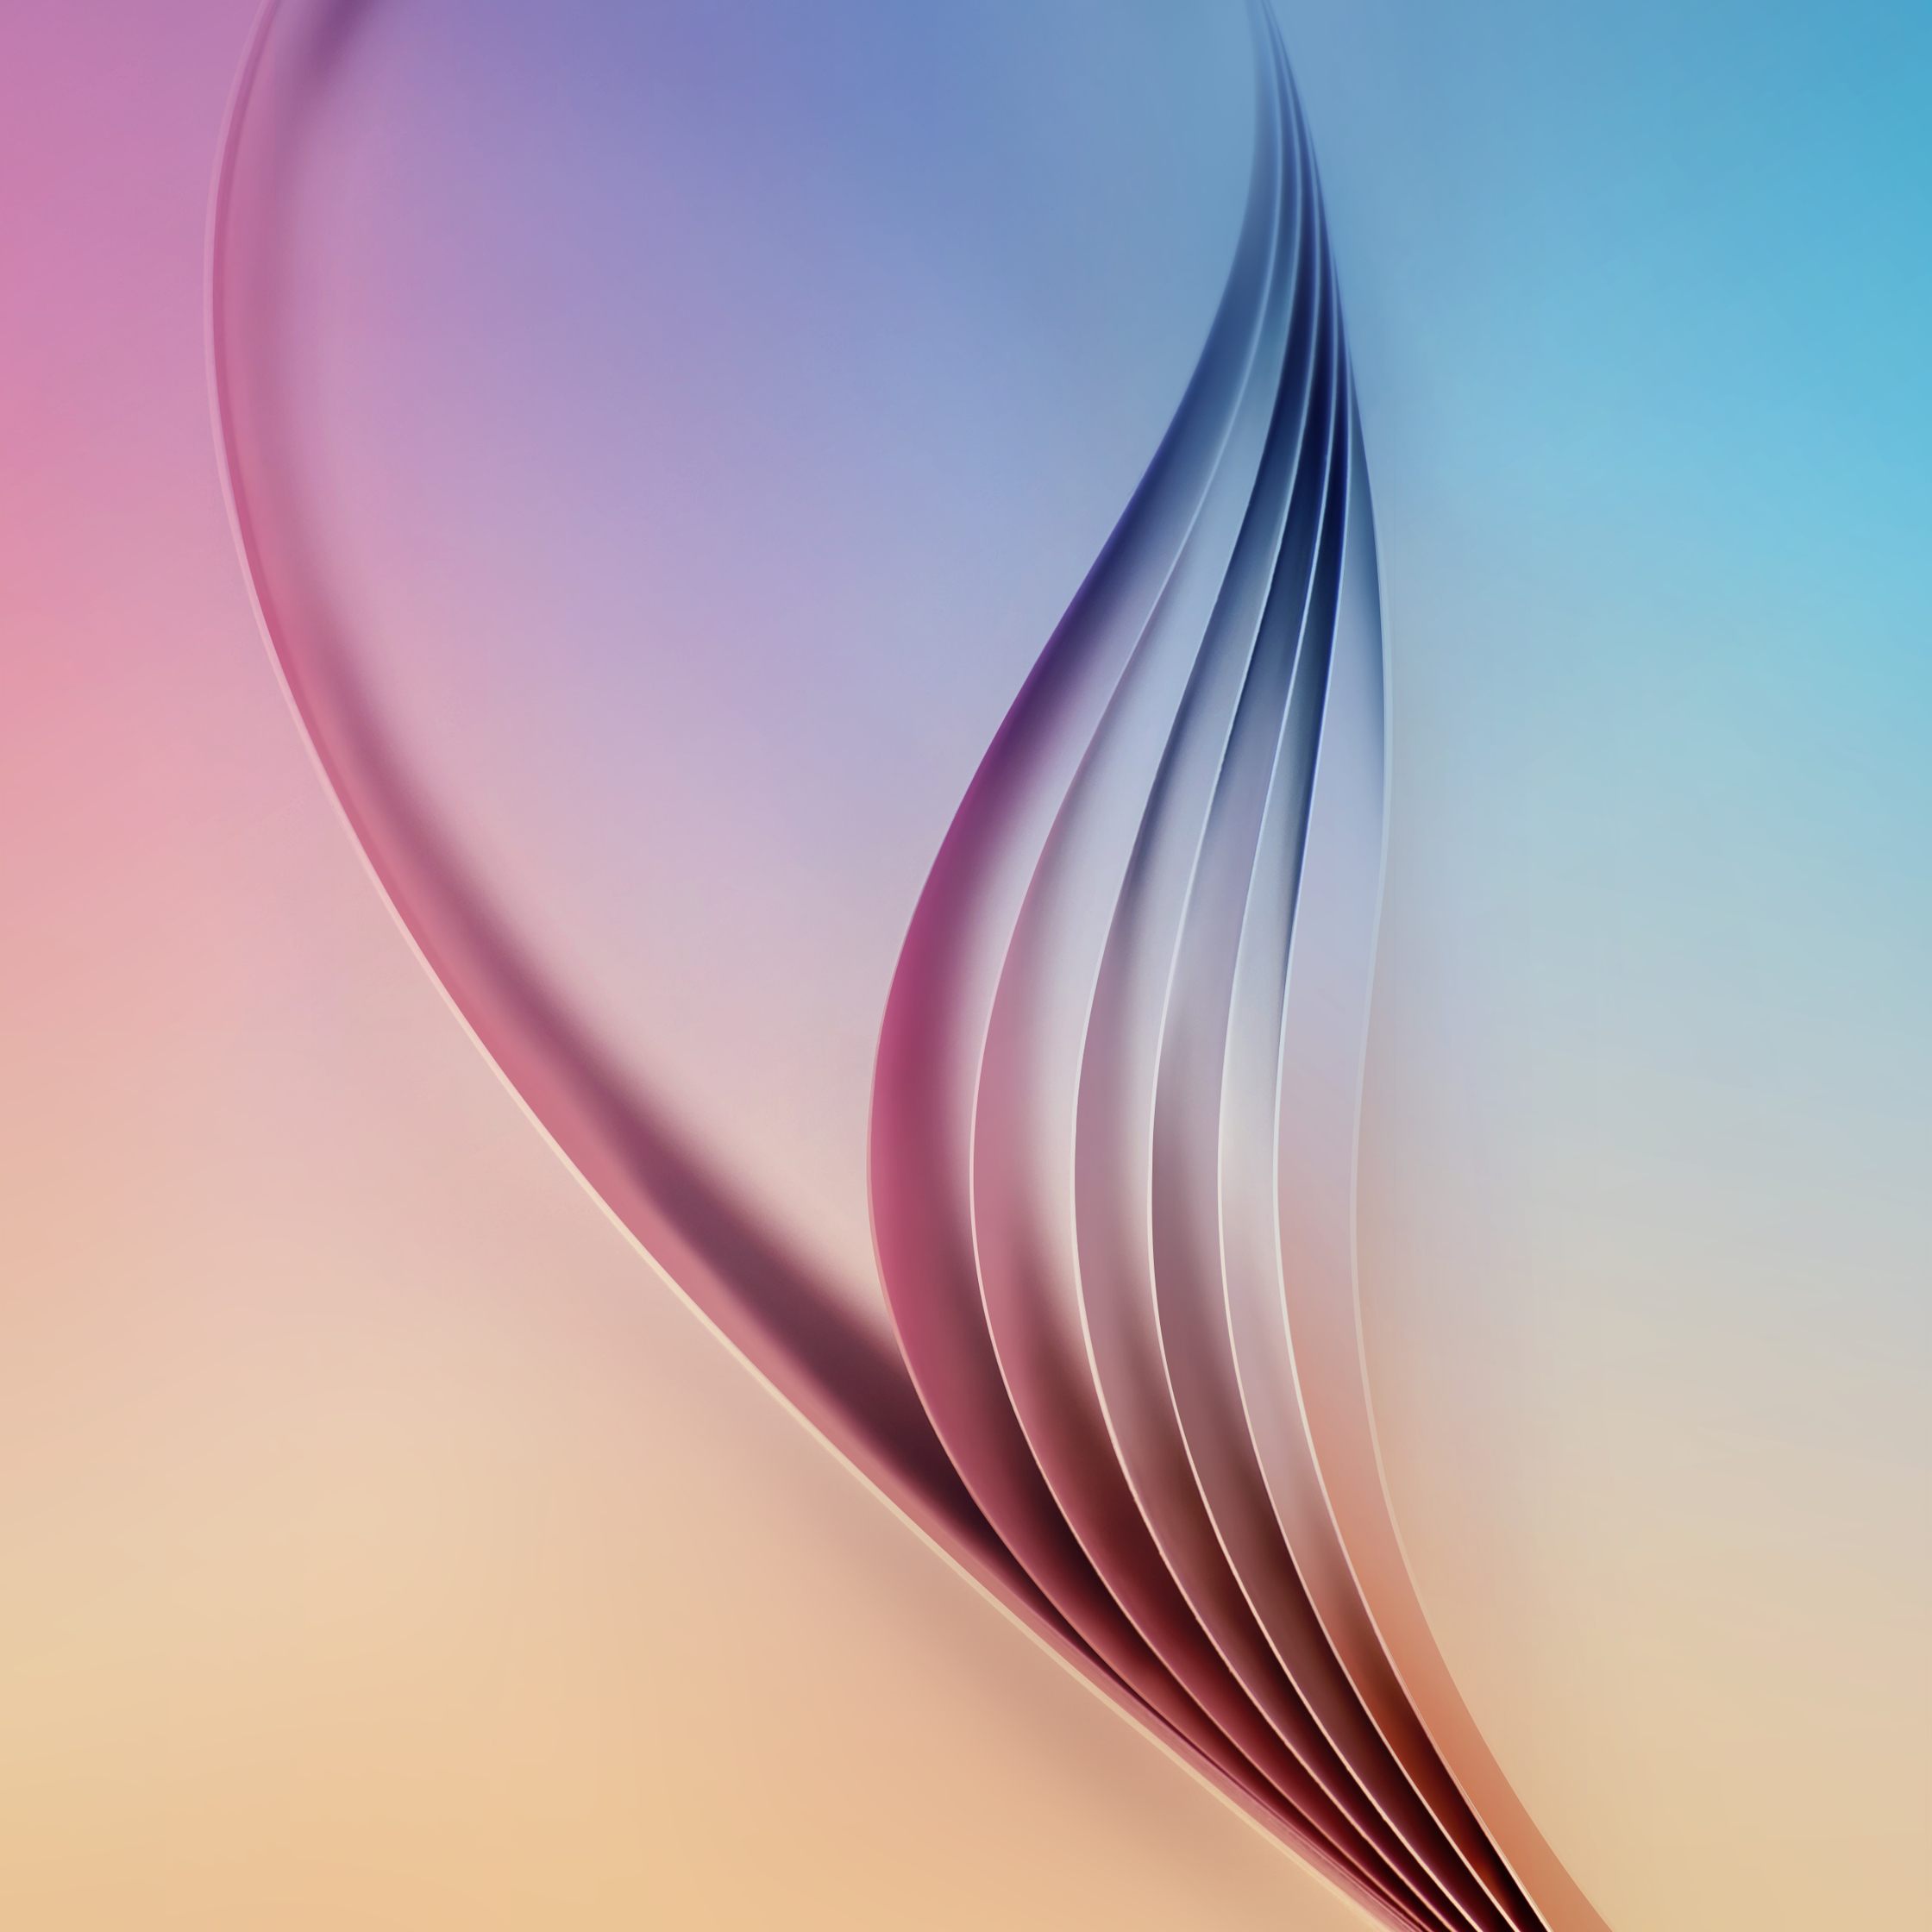 The Galaxy S6 S Wallpaper Are Also Up For Grabs Which You Can